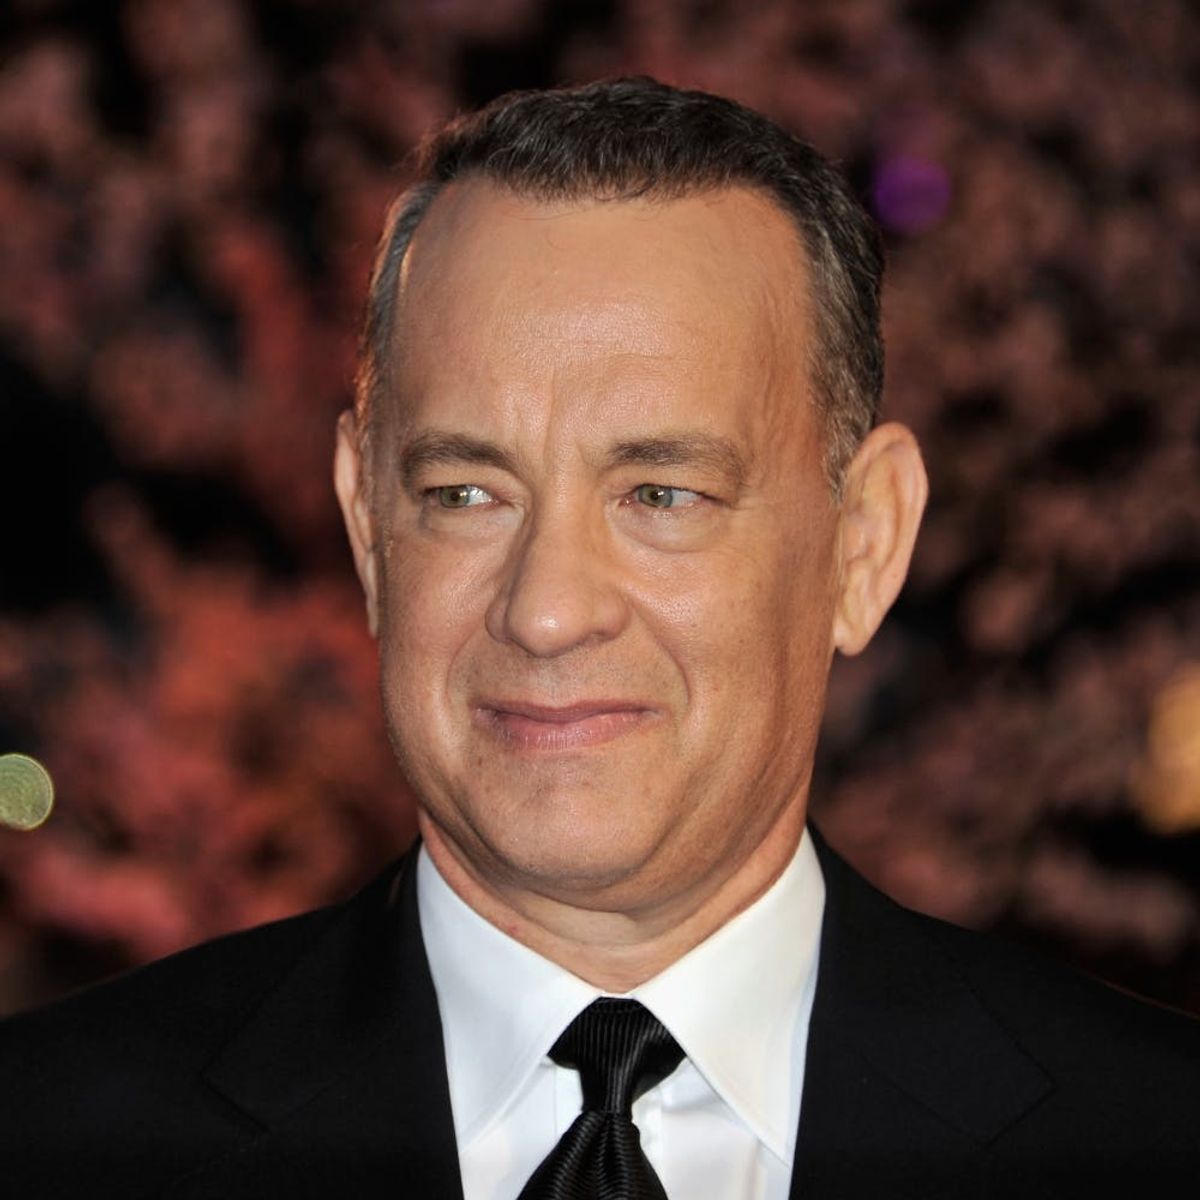 Tom Hanks Just Gave the White House Press Corps the Daddest Gift Ever